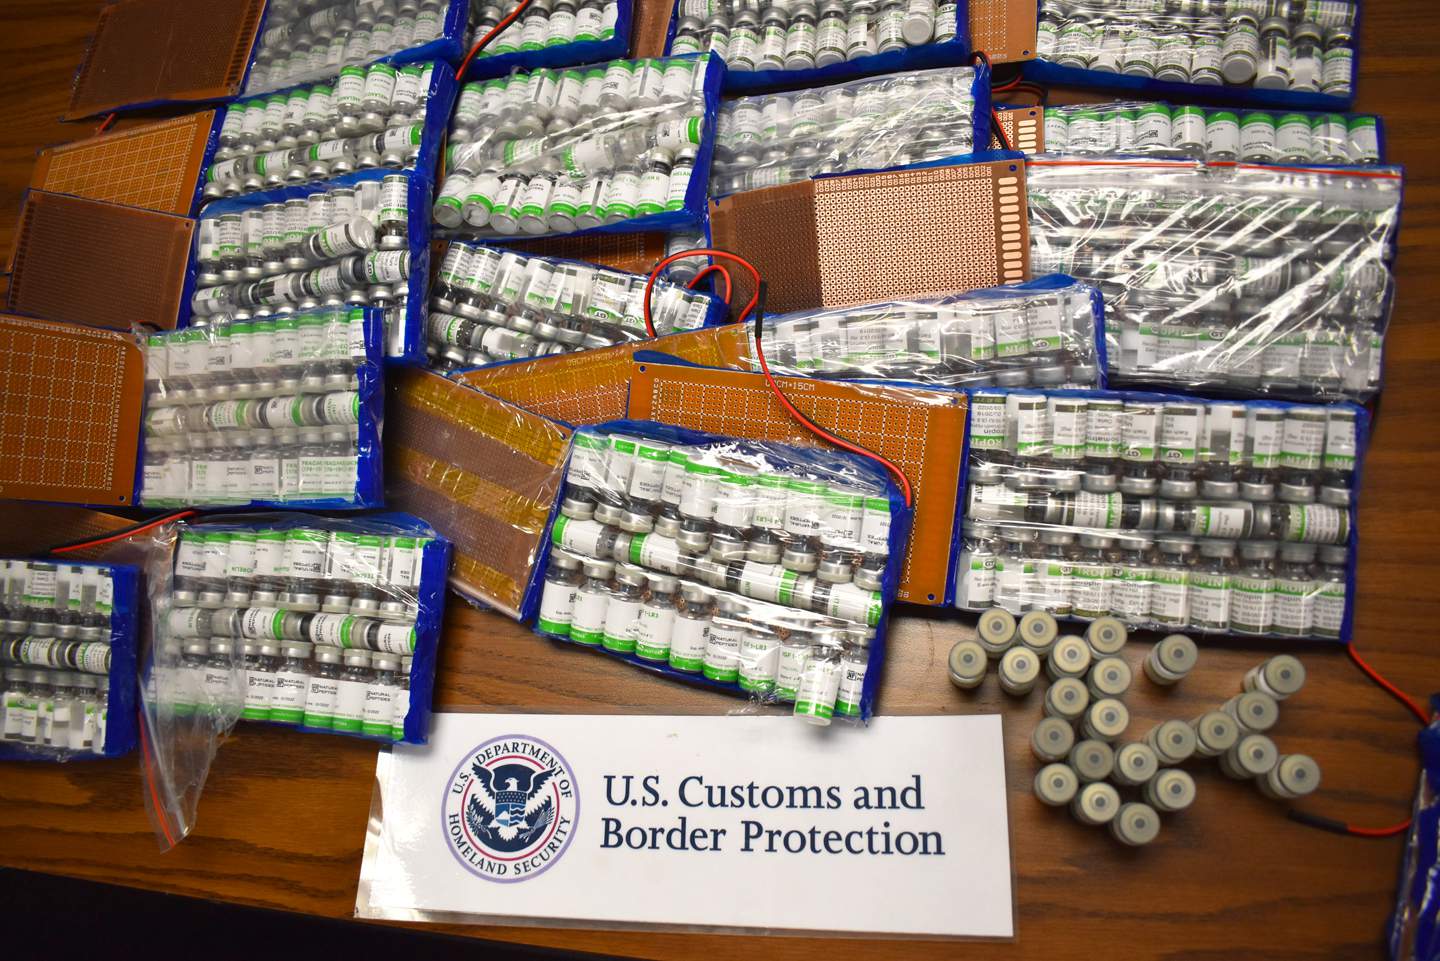 Officials in Philadelphia seize 456 vials of Polish HGH heading to address in St. Clair County